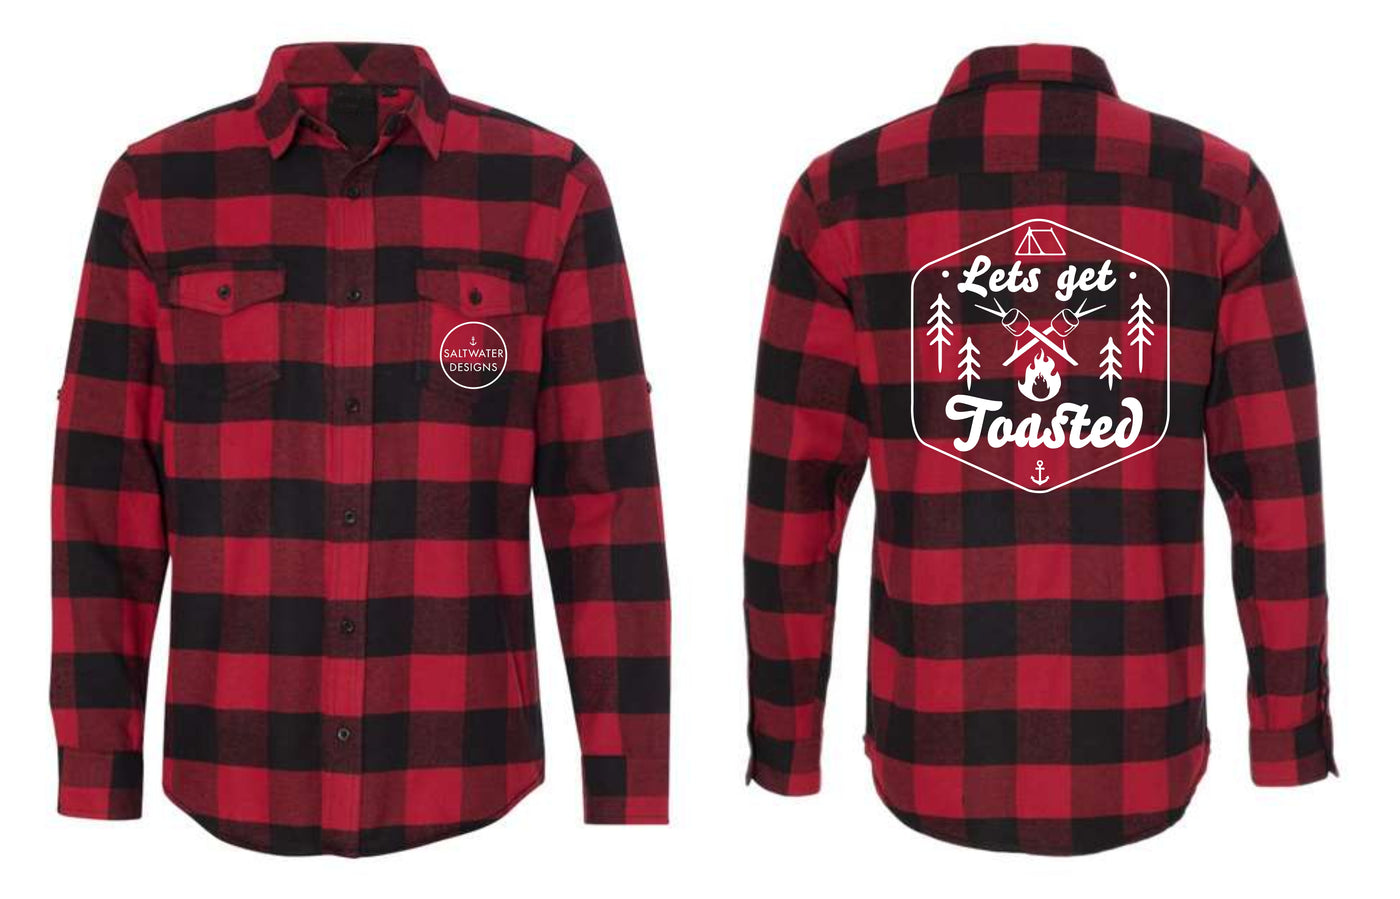 "Let's Get Toasted" Unisex Plaid Flannel Shirt